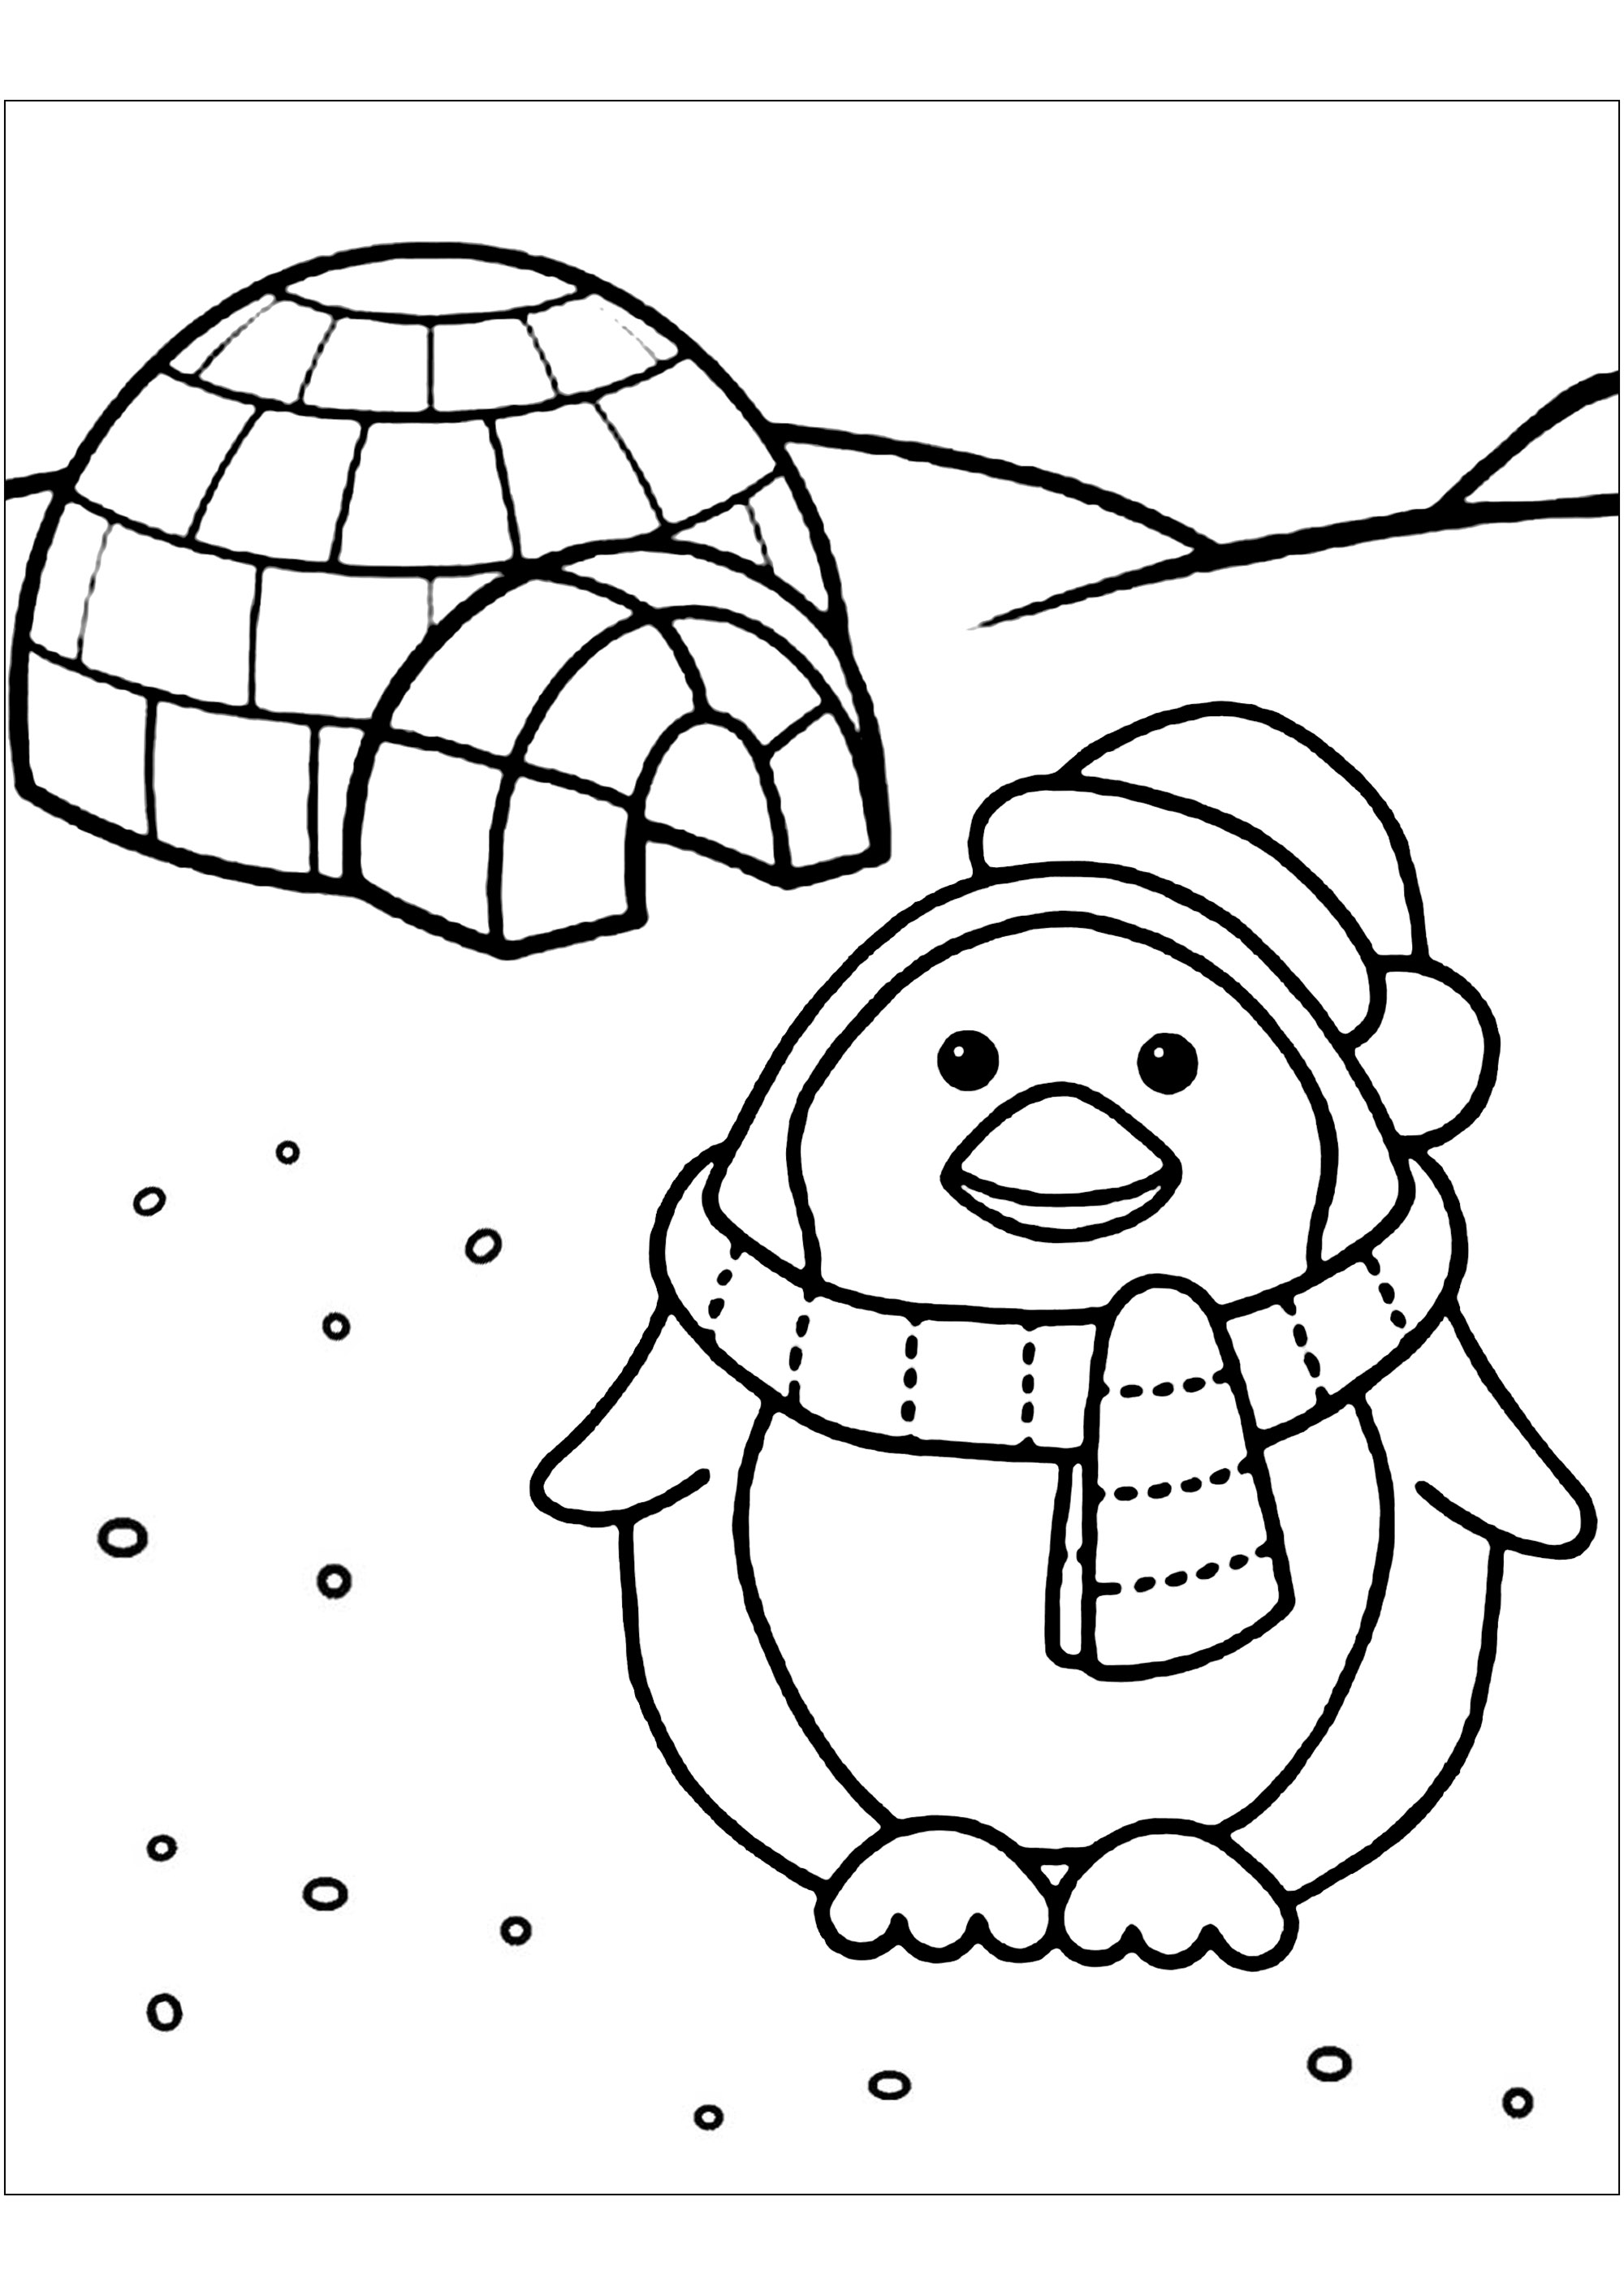 Simple coloring of a penguin and his little igloo. Around this little penguin wearing a scarf, there are snowflakes, which you can also color.